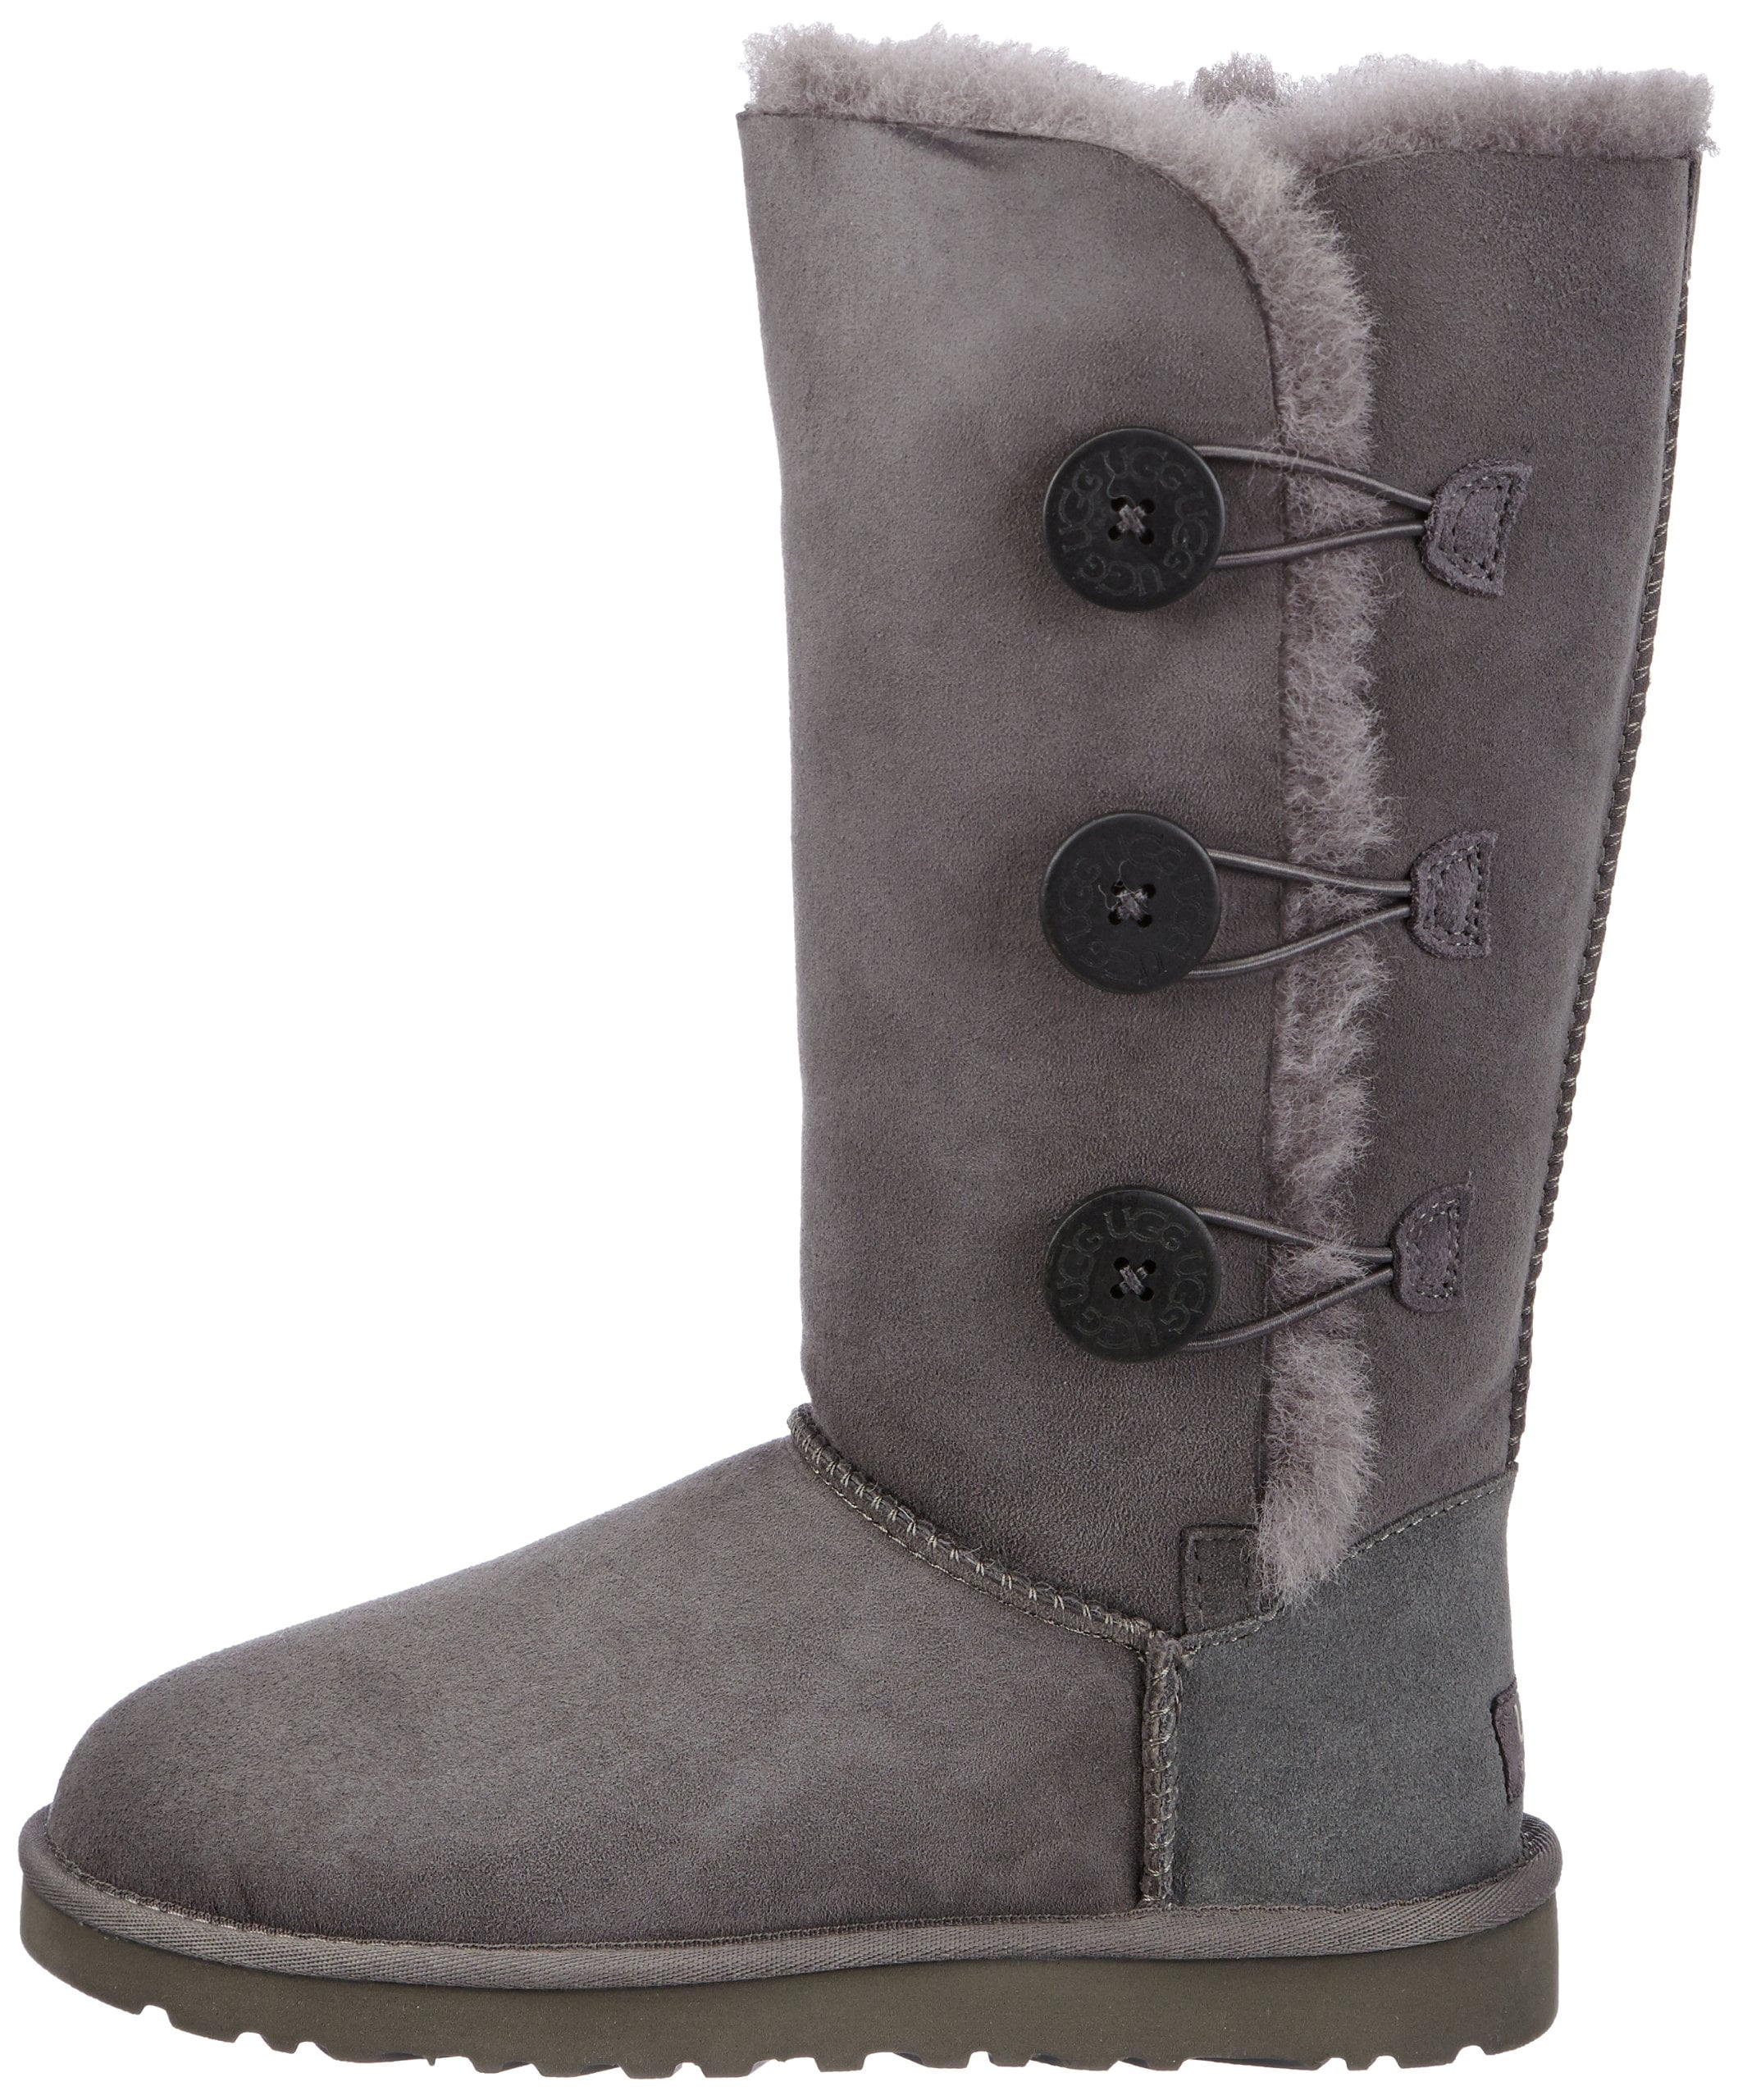 gray ugg boots with buttons